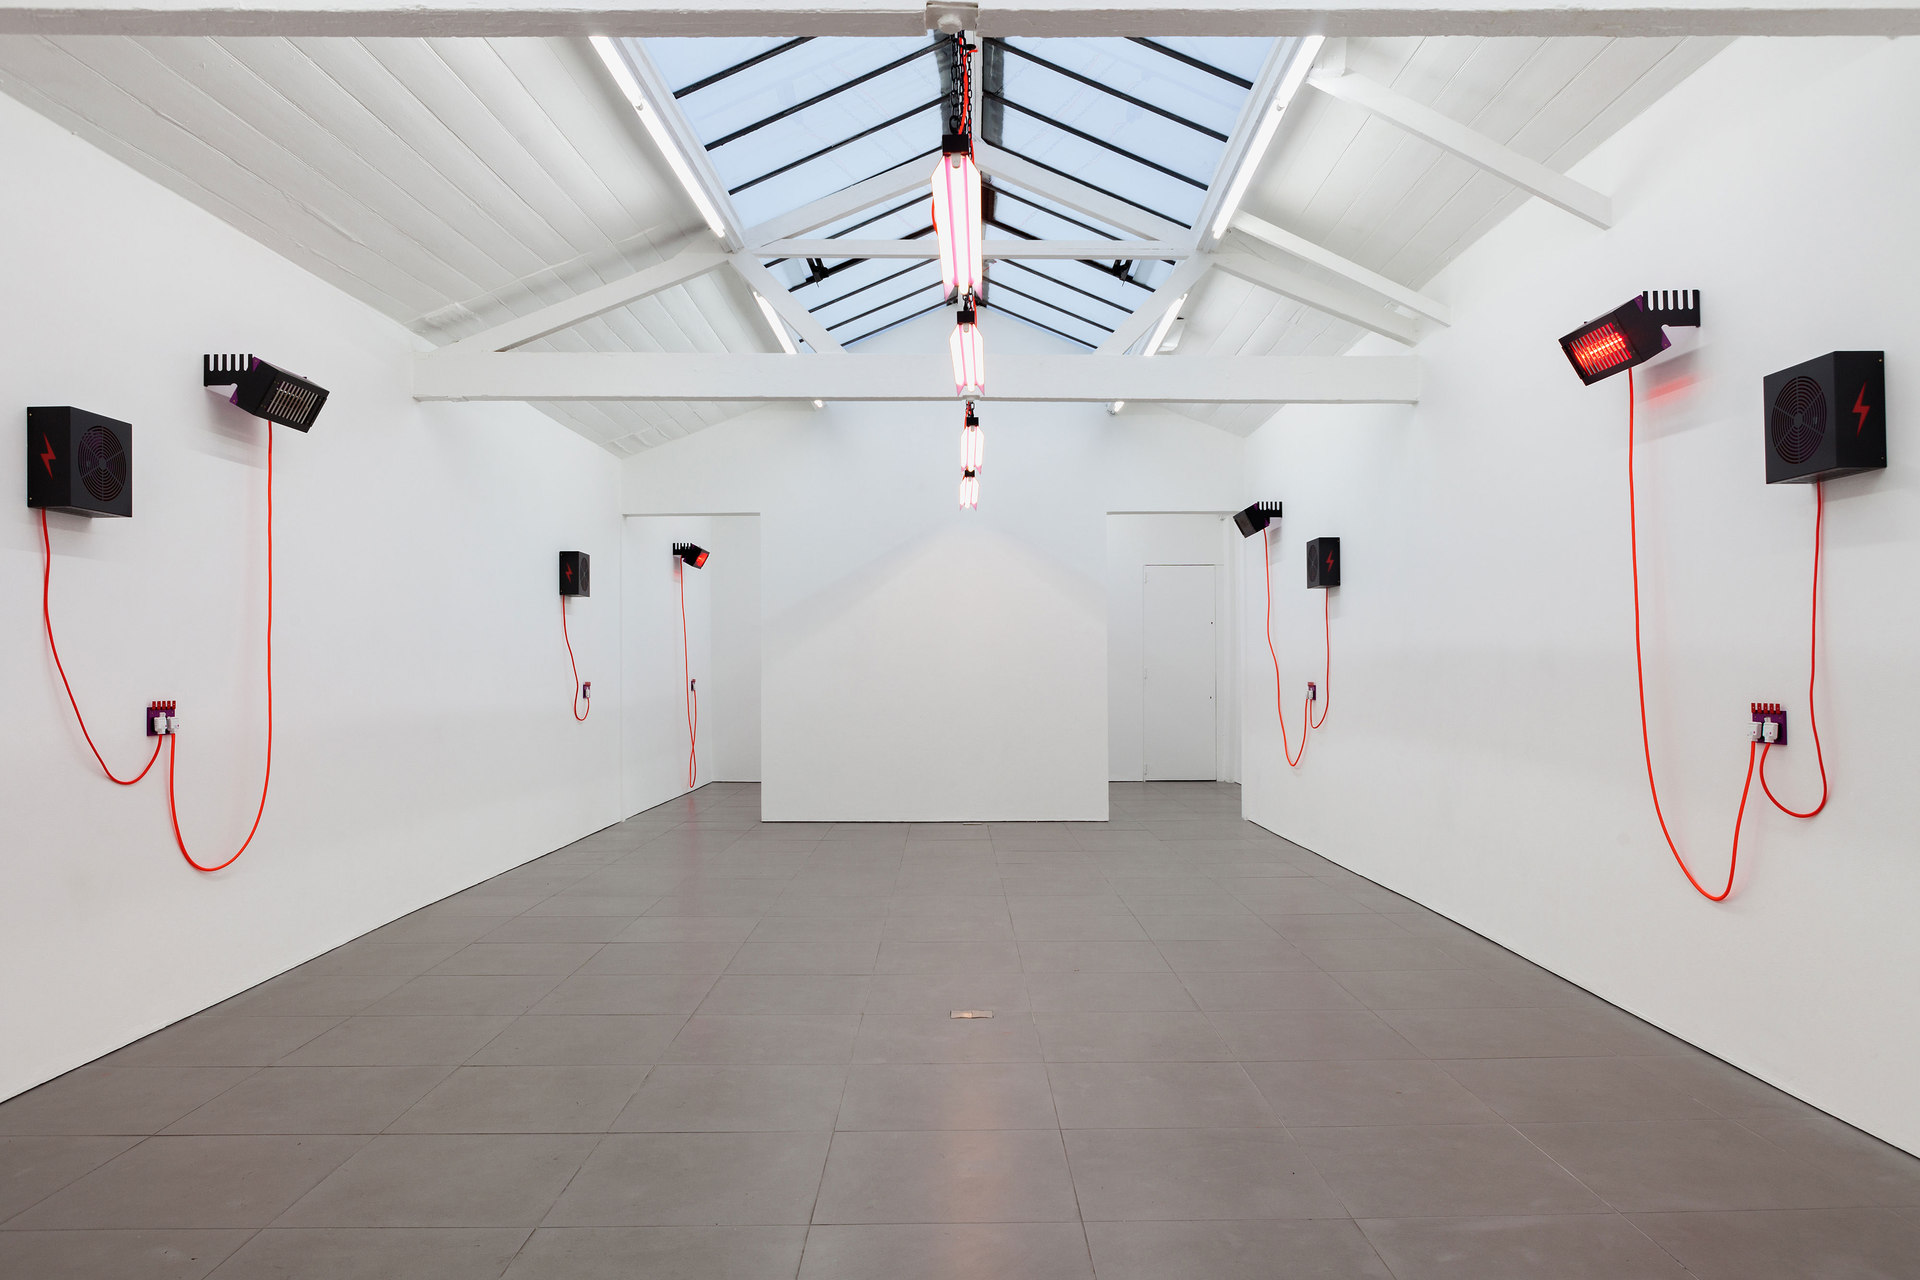 Natalie Dray, DRAY, 2015, installation view, Cell Project Space